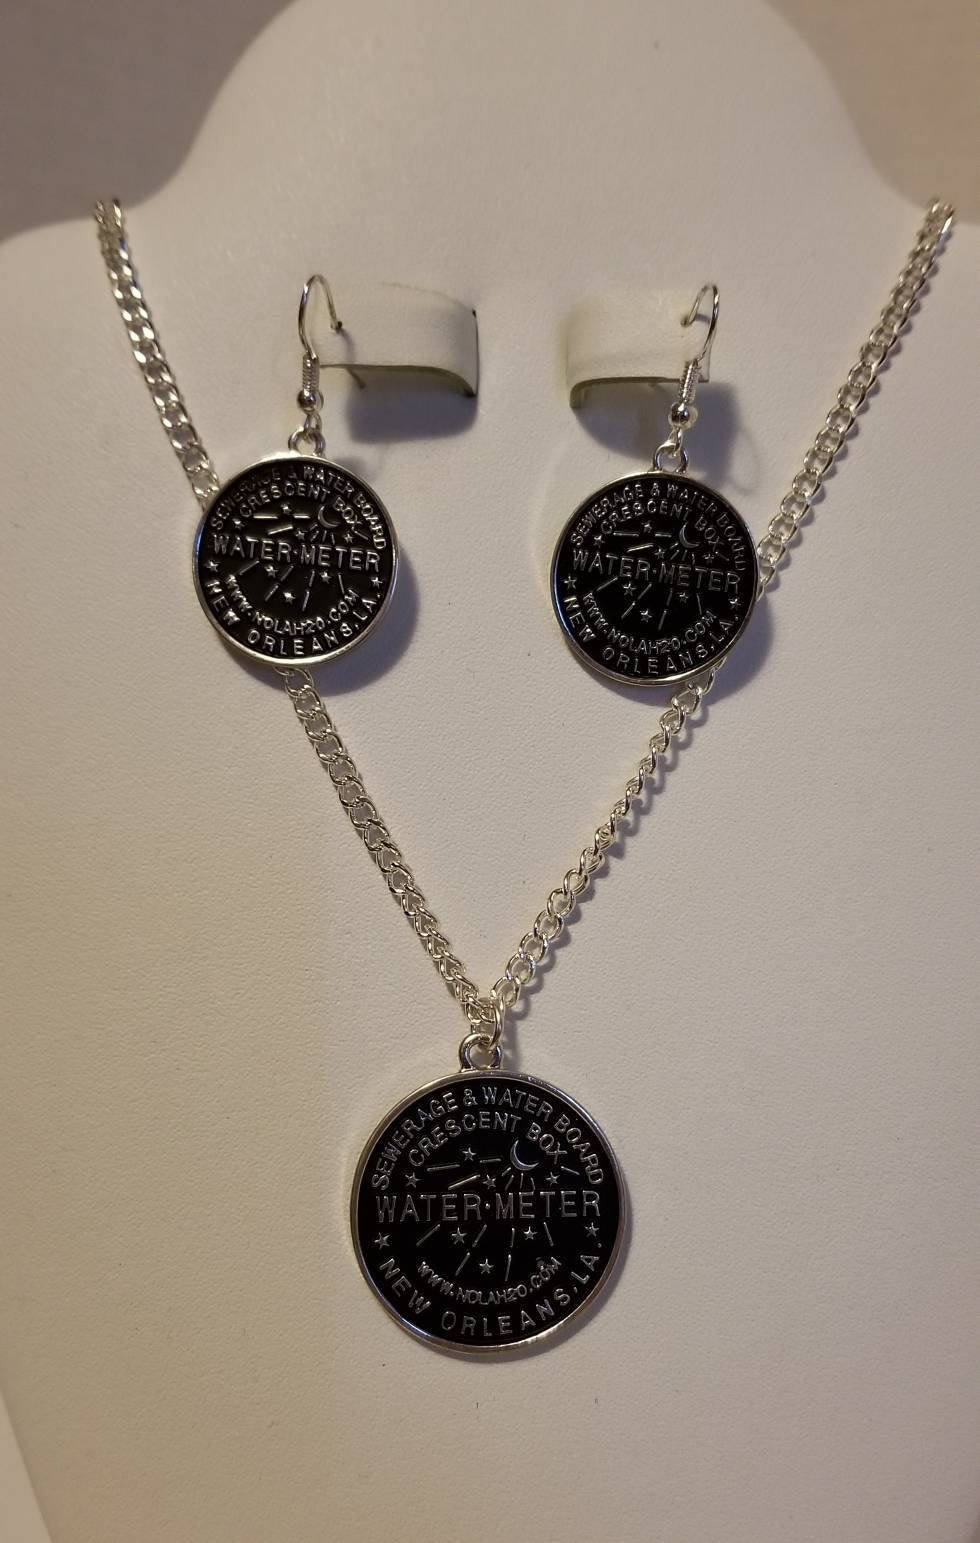 Sewerage and Waterboard New Orleans Louisiana Pendant Necklace and earring set